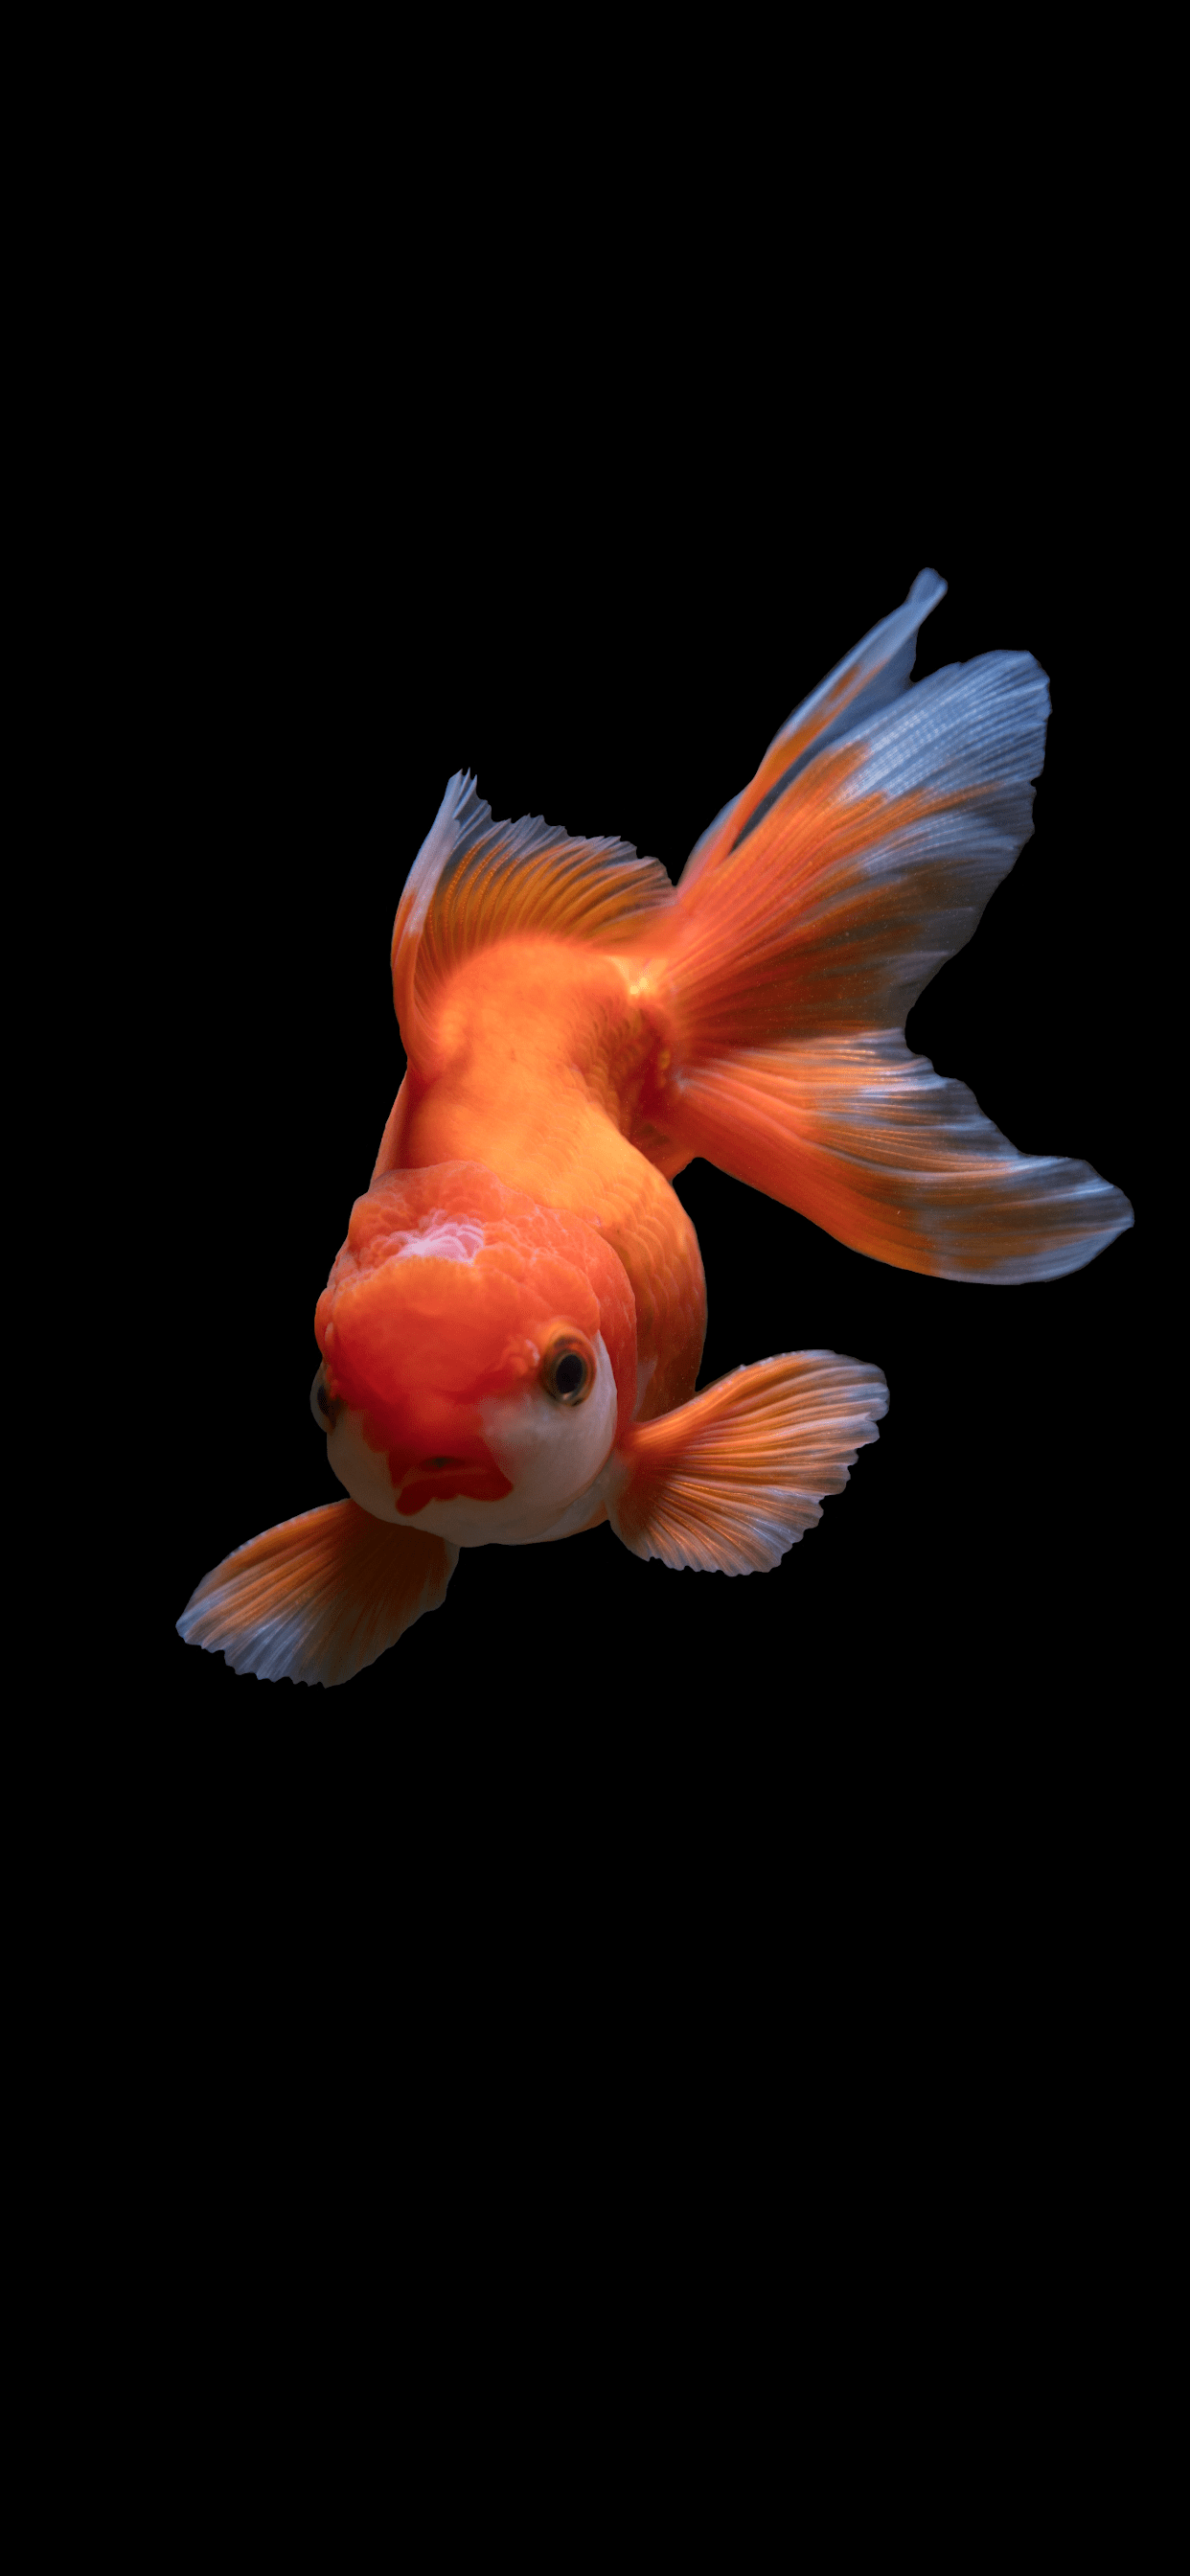 Fish Wallpaper for iPhone Pro Max, X, 6